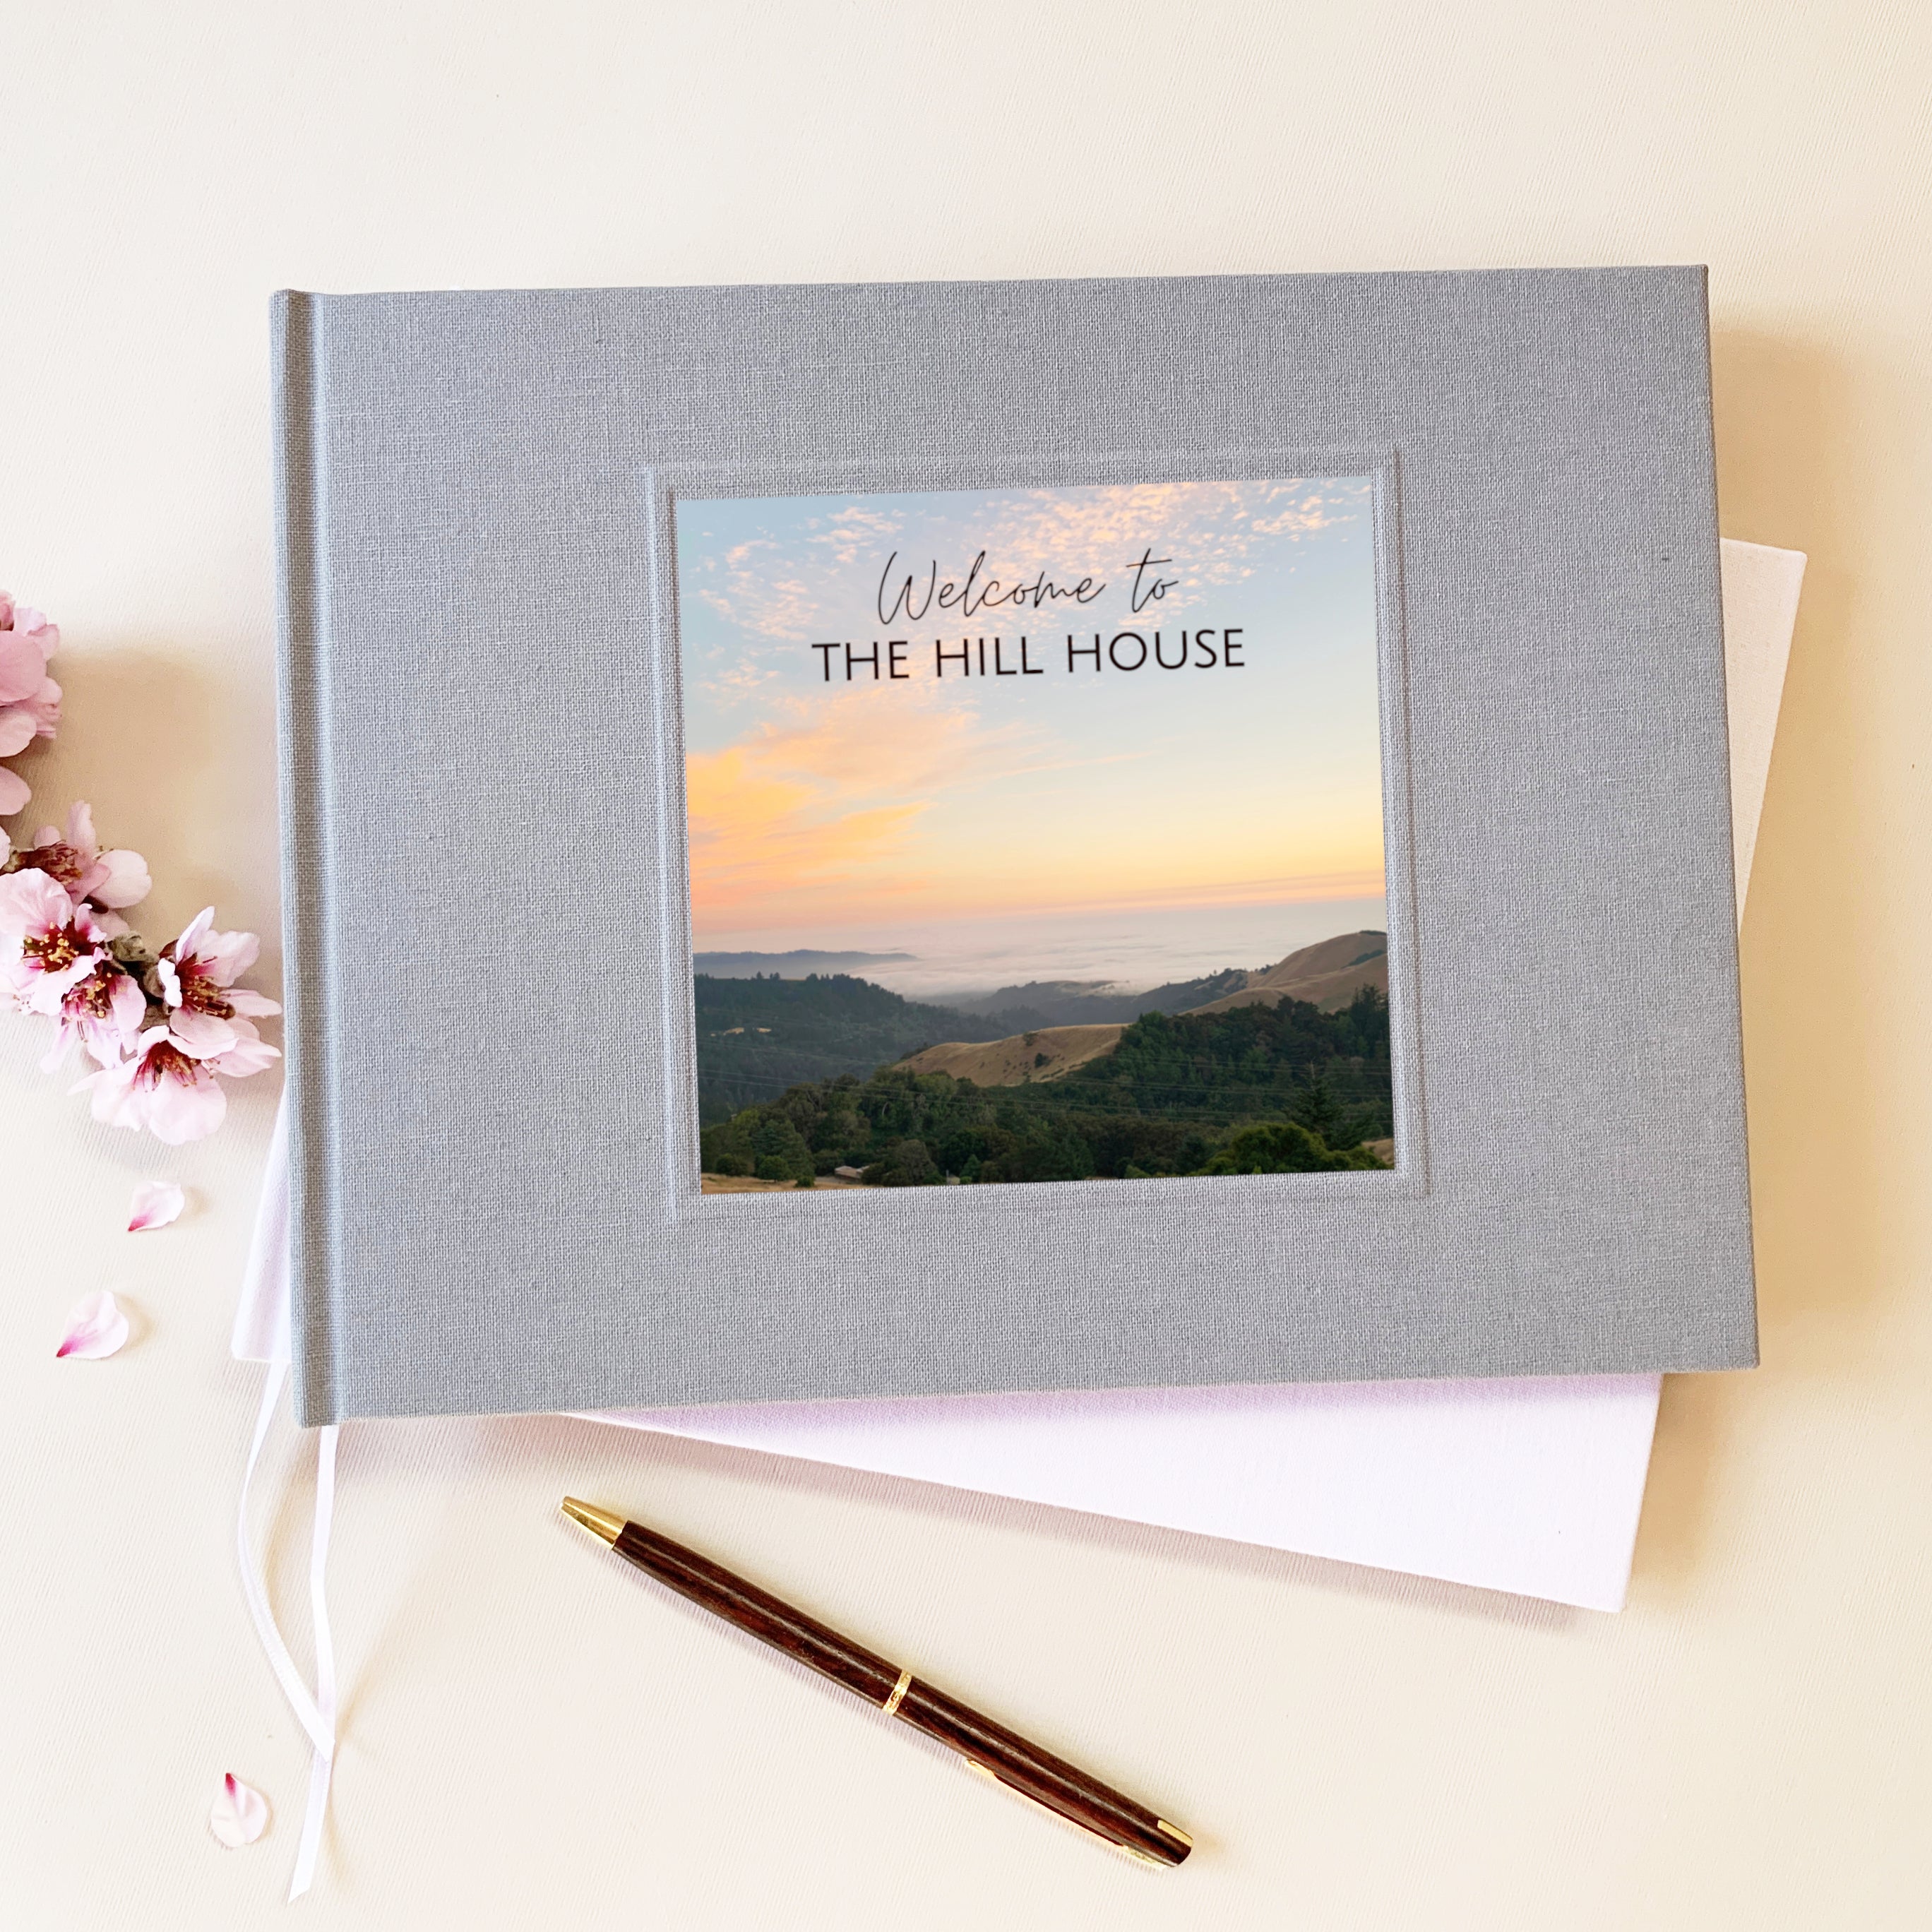 Guest Book for vacation home (Hardcover) (Hardcover)